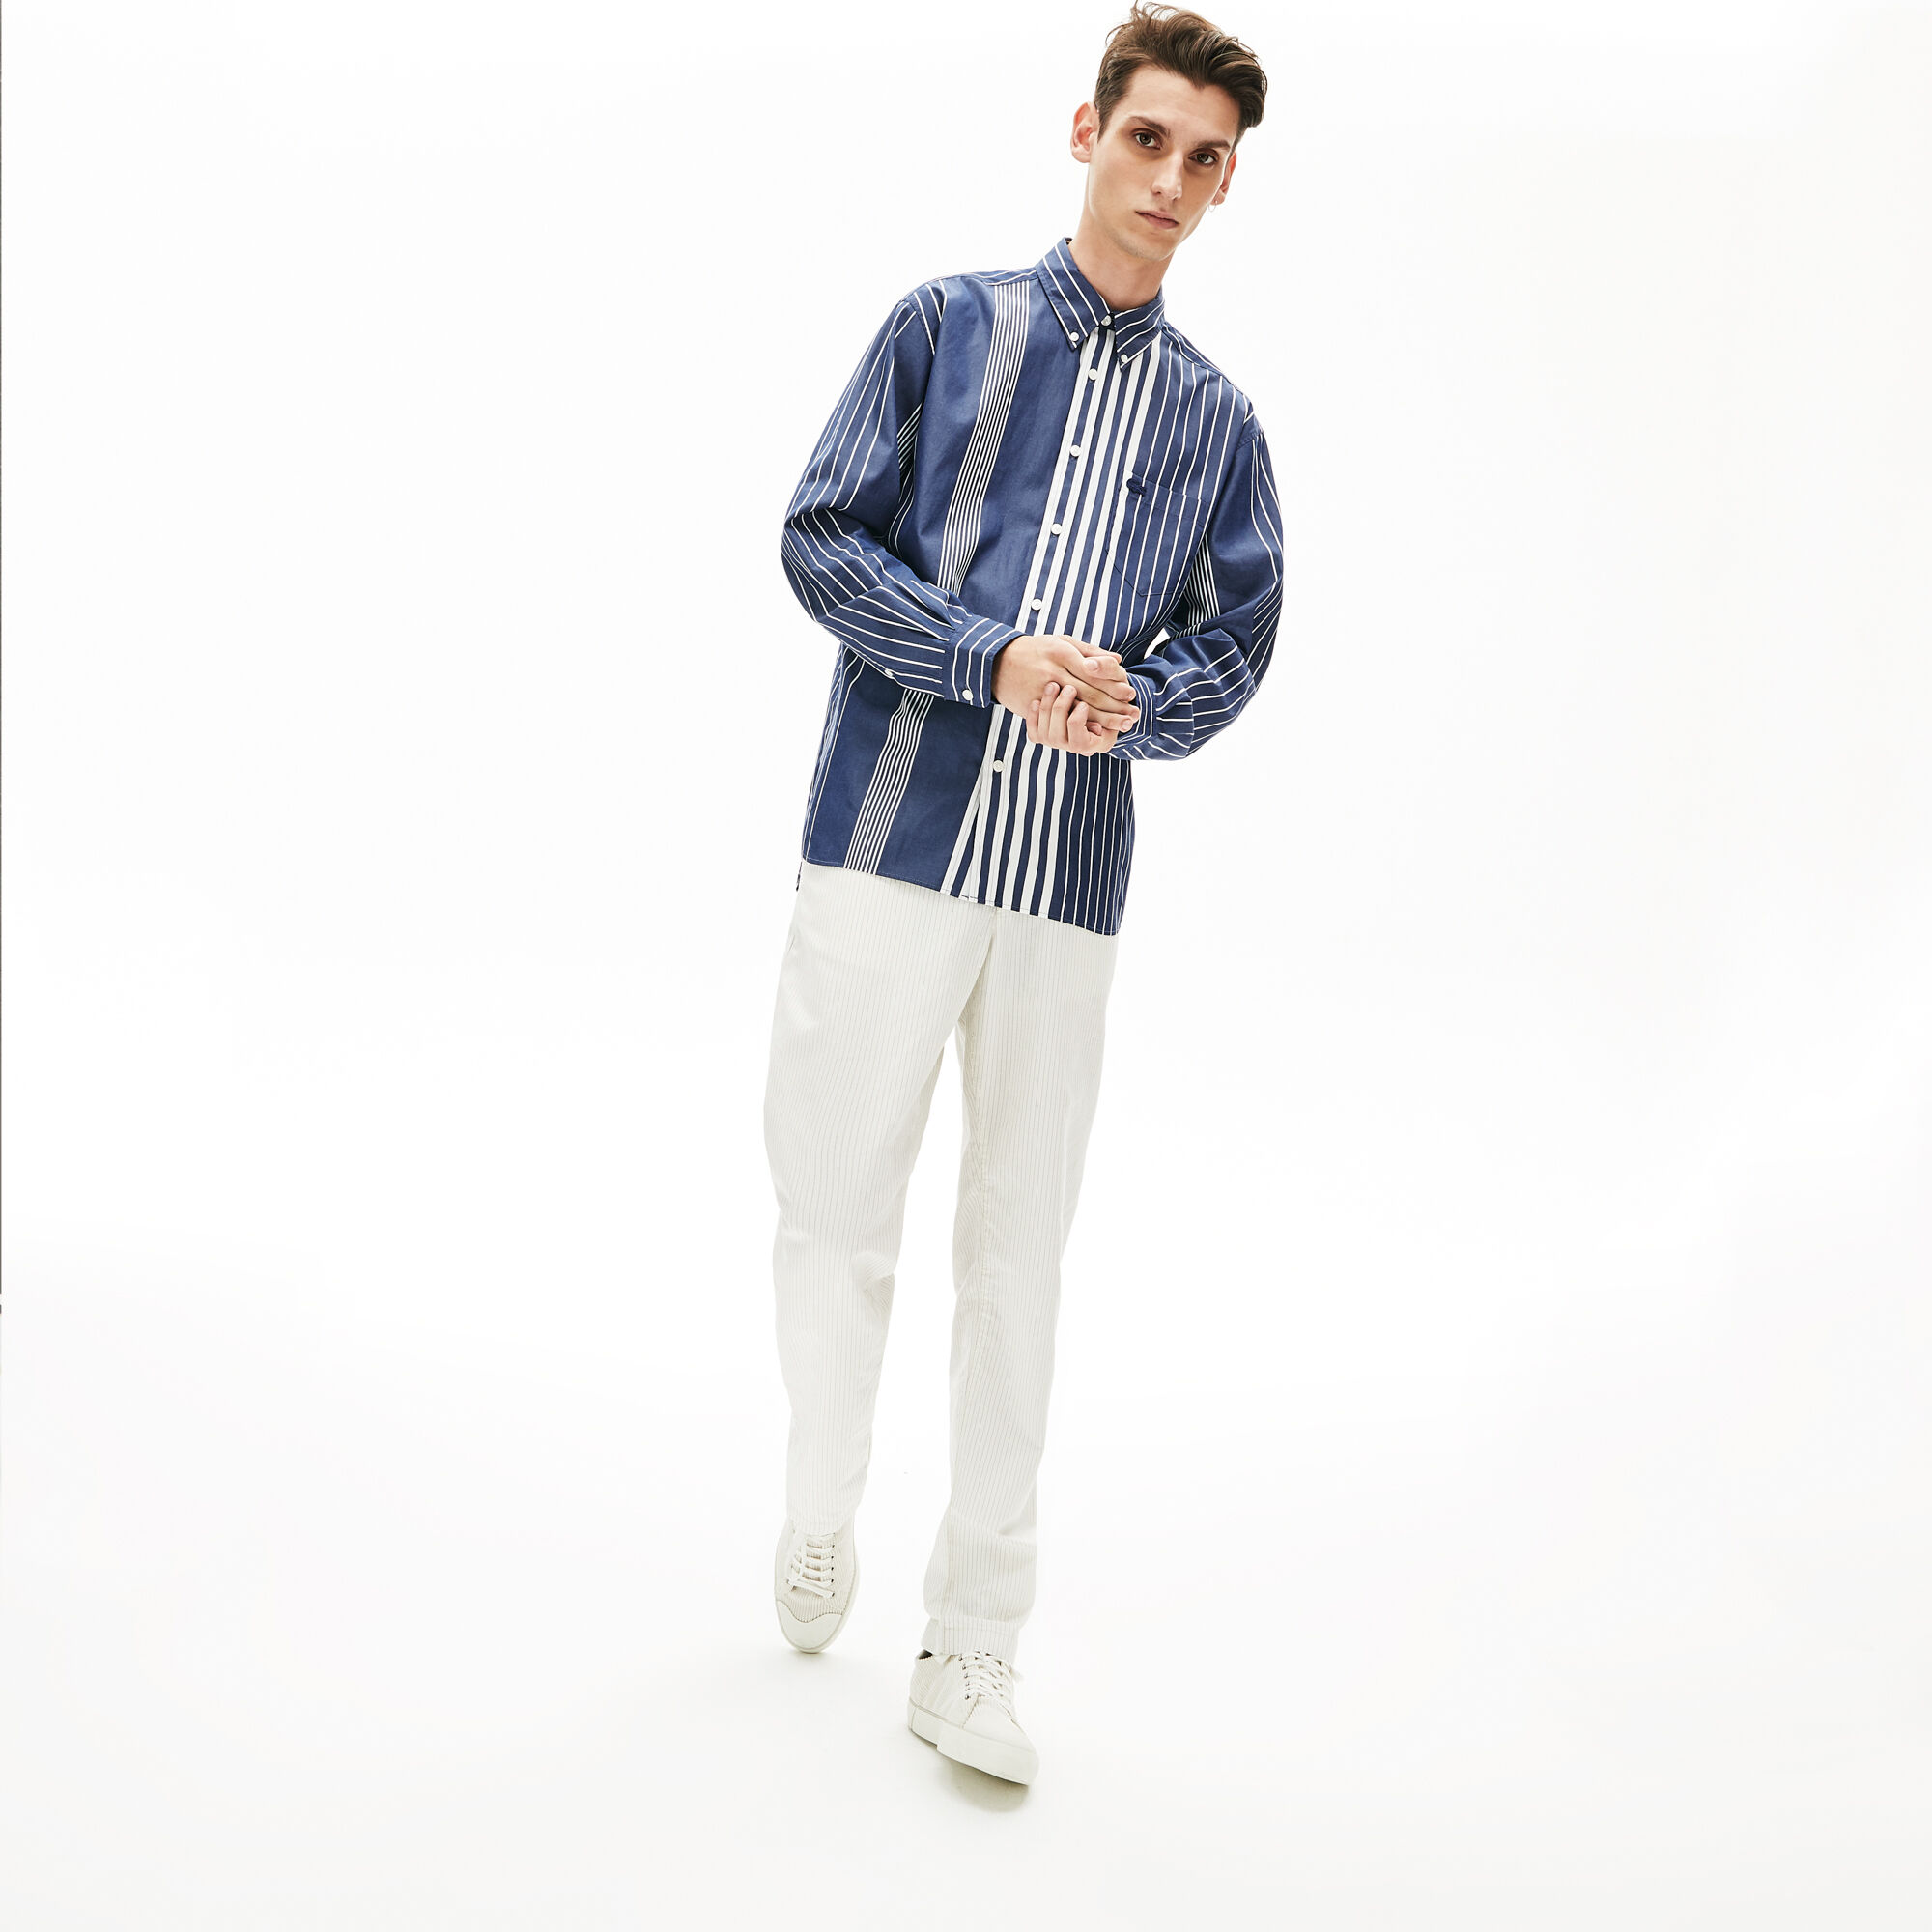 Men's Mismatched Striped Relaxed Fit Cotton Shirt